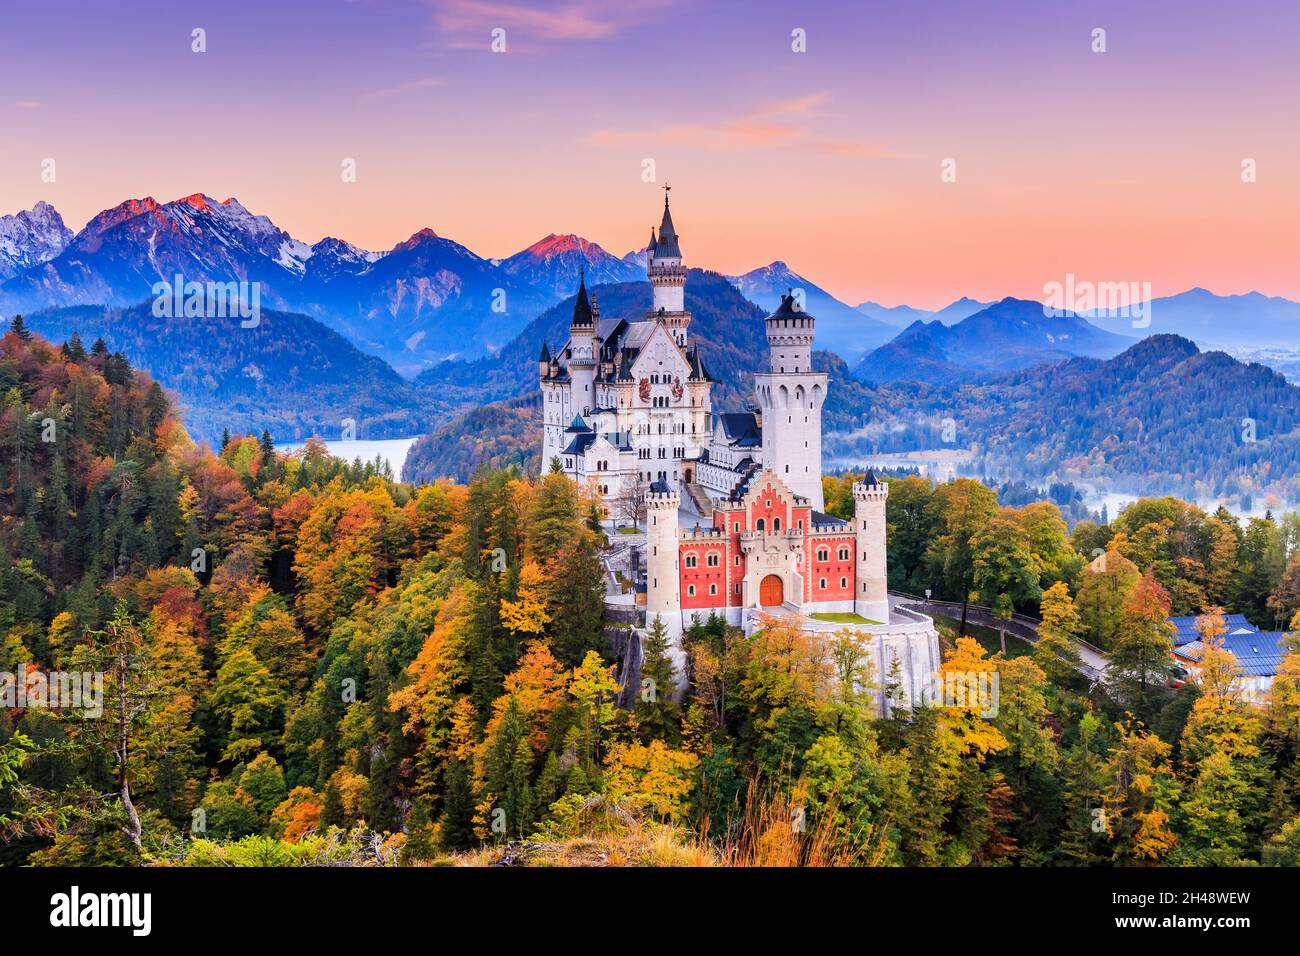 Germany, Neuschwanstein Castle. View of the castle and the Bavarian Alps at sunrise during fall season. Stock Photo